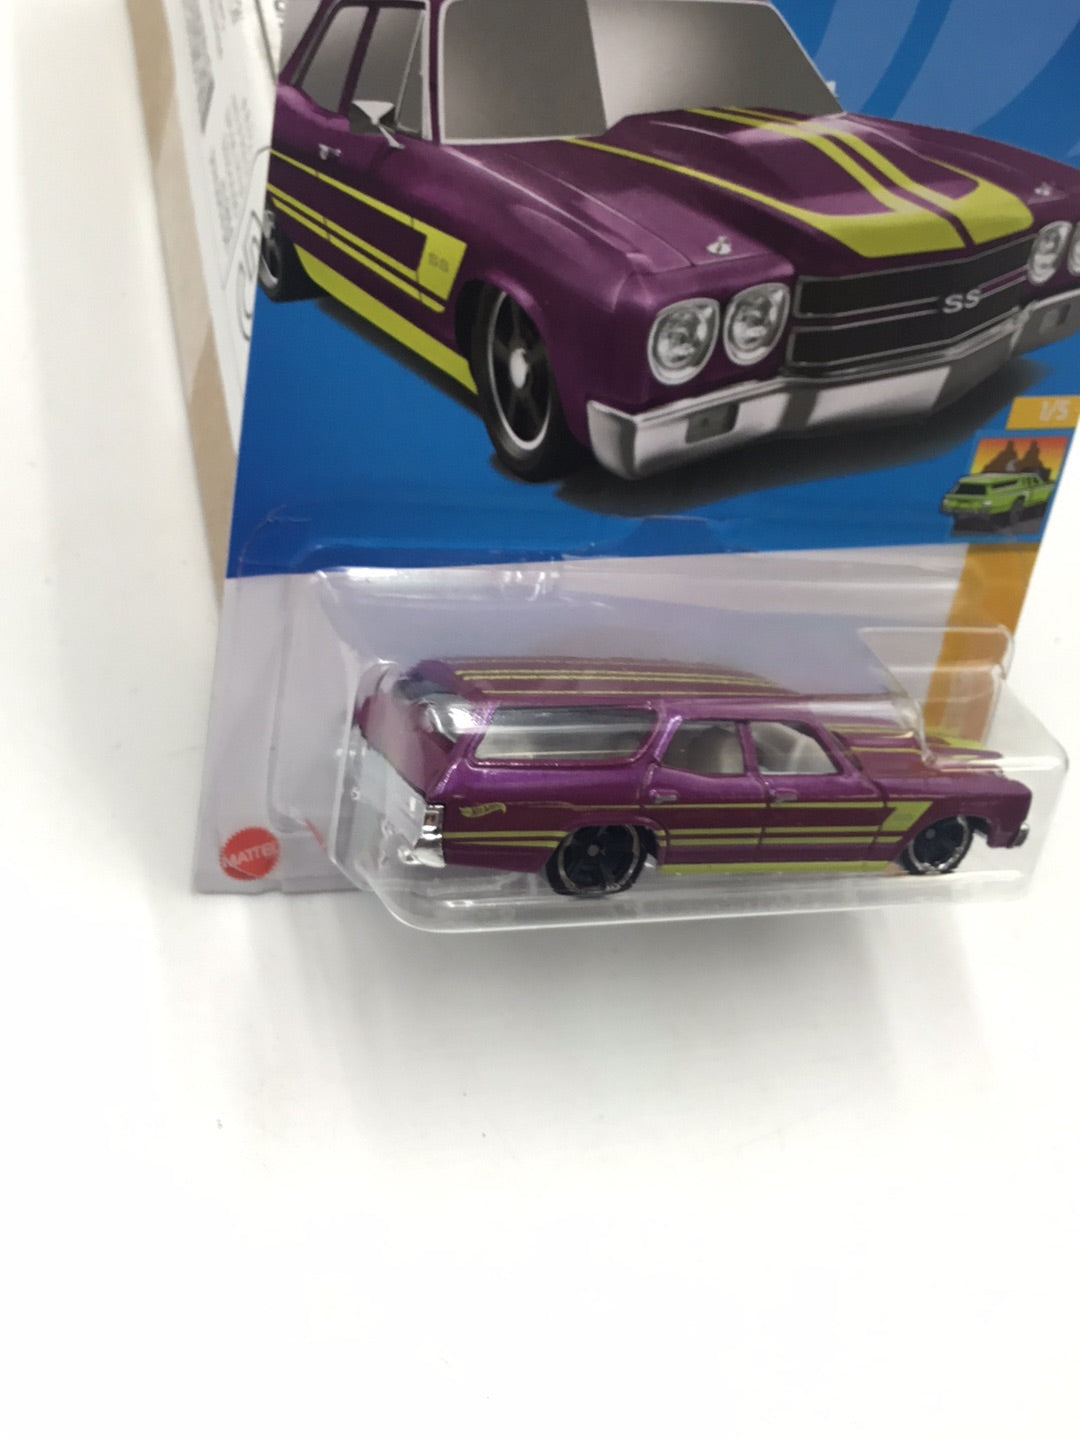 2022 hot wheels #111 70 Chevelle SS Wagon Kroger Exclusive